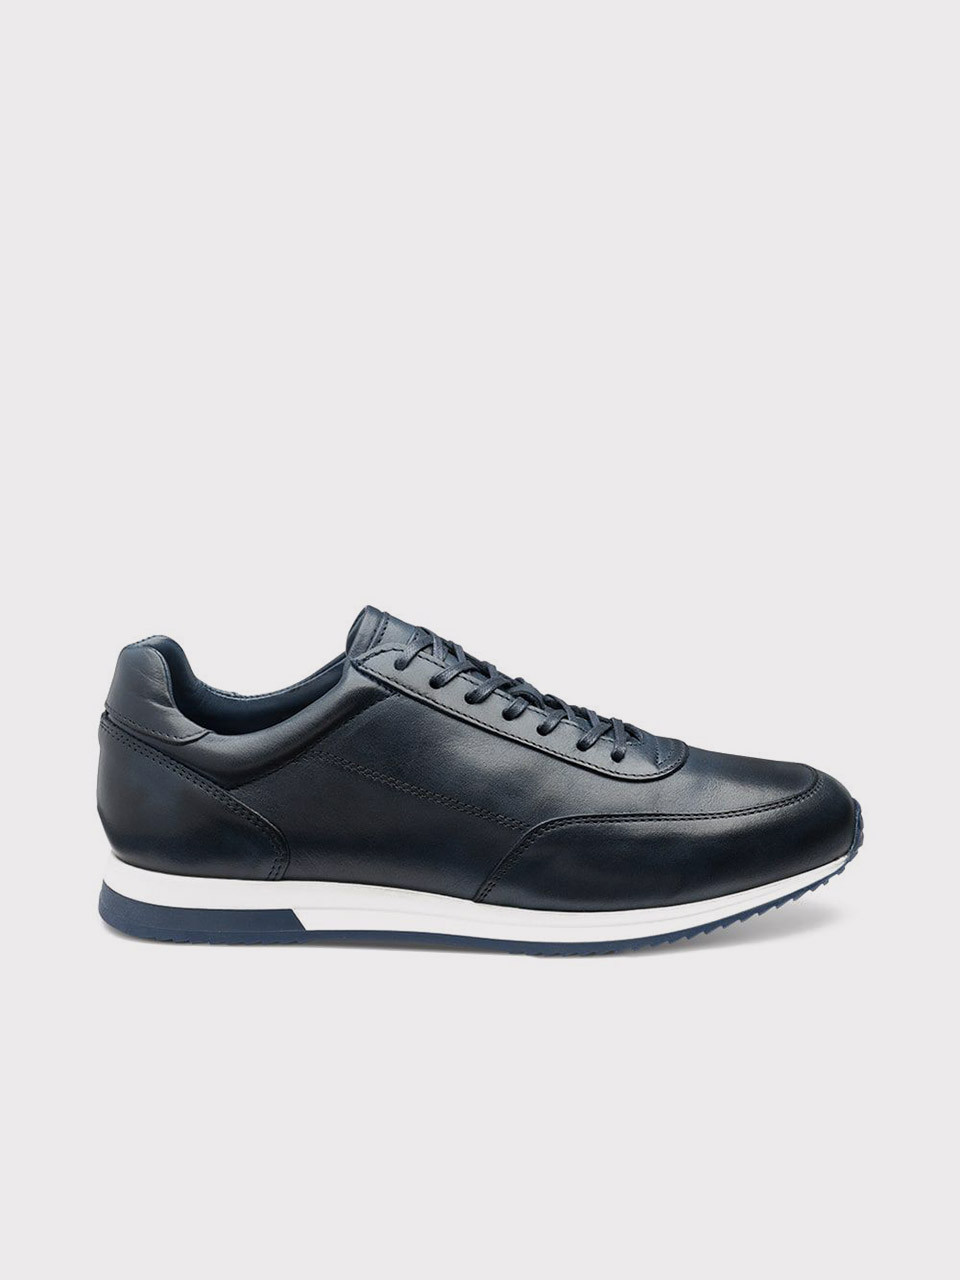 Navy Loake Bannister Trainer | Peter Christian